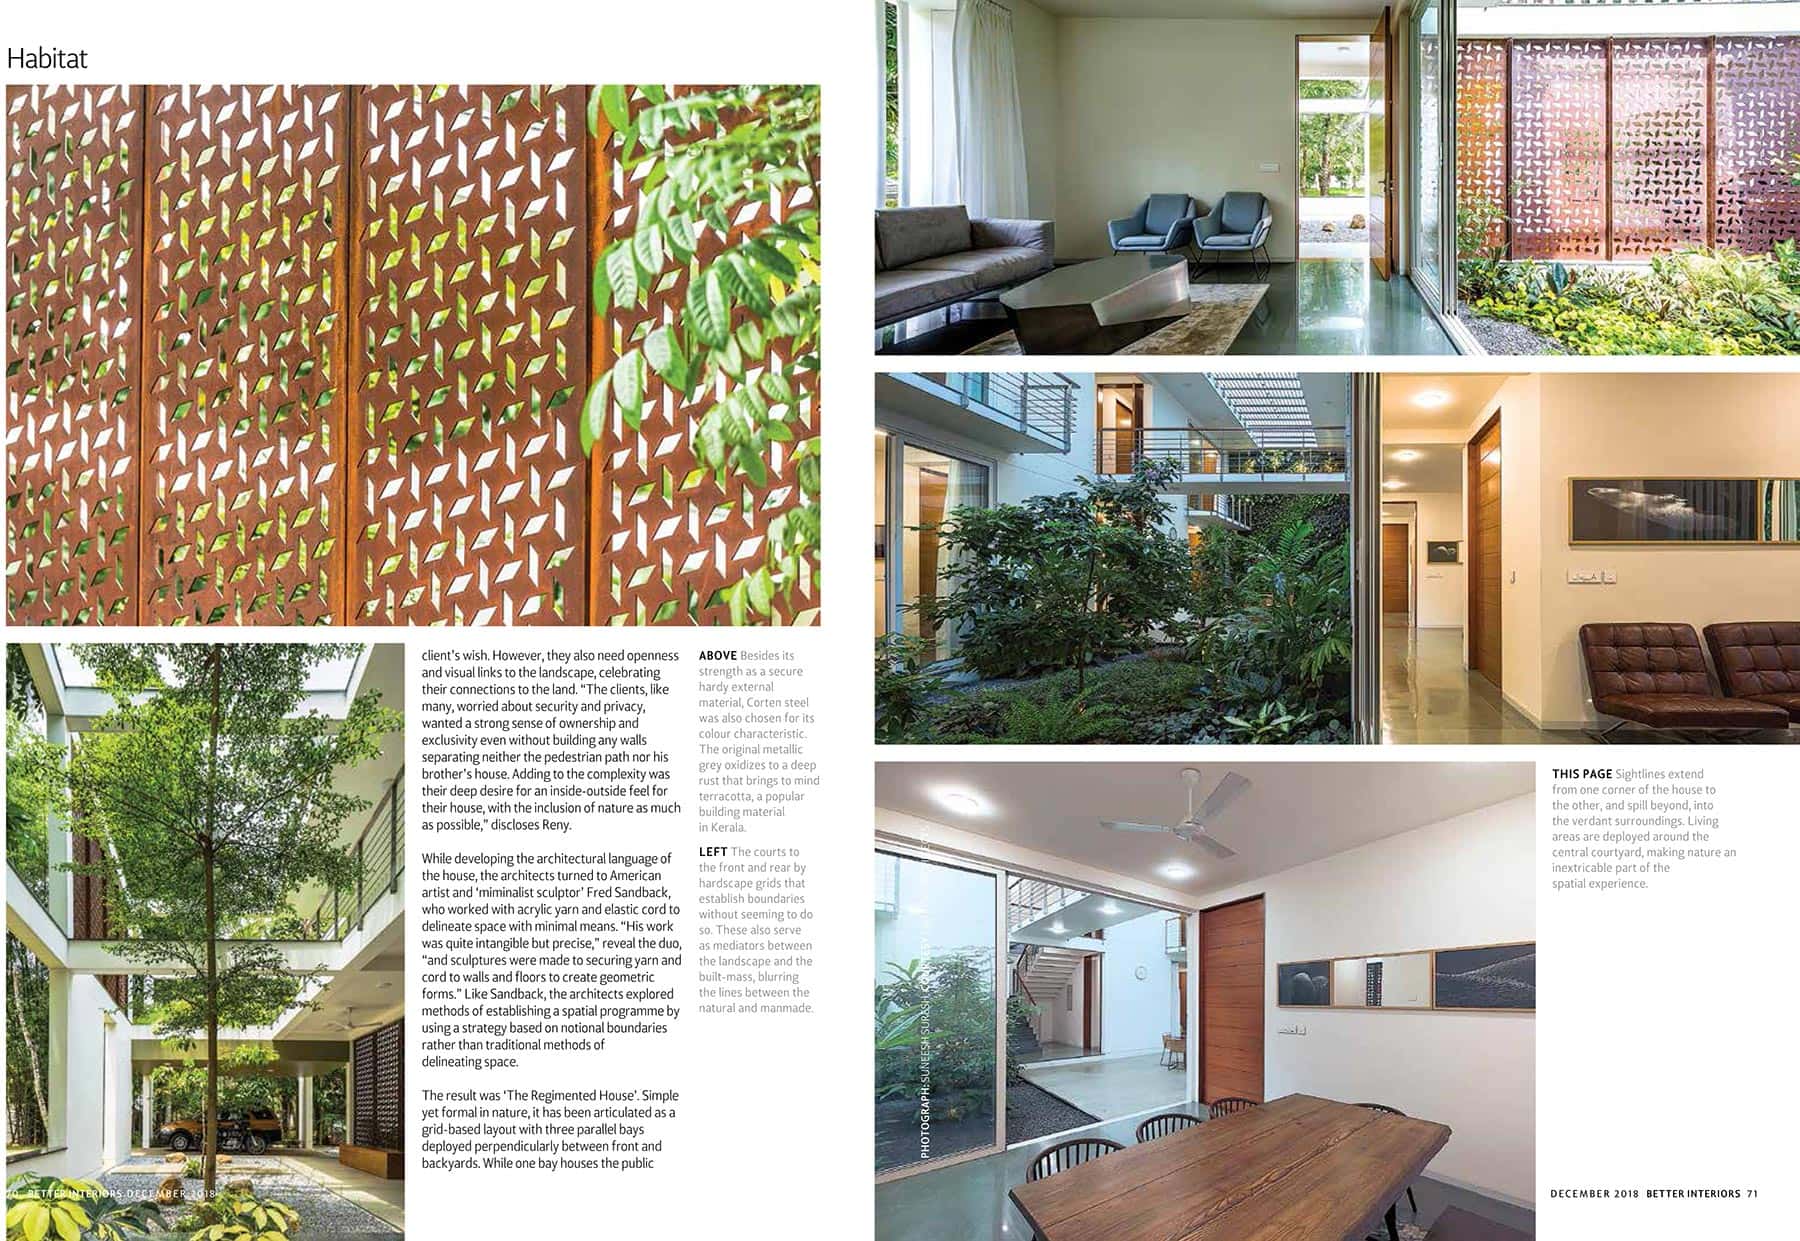 better-interiors-magazine-india-feature-a-cover-story-on-the-regimented-house-3